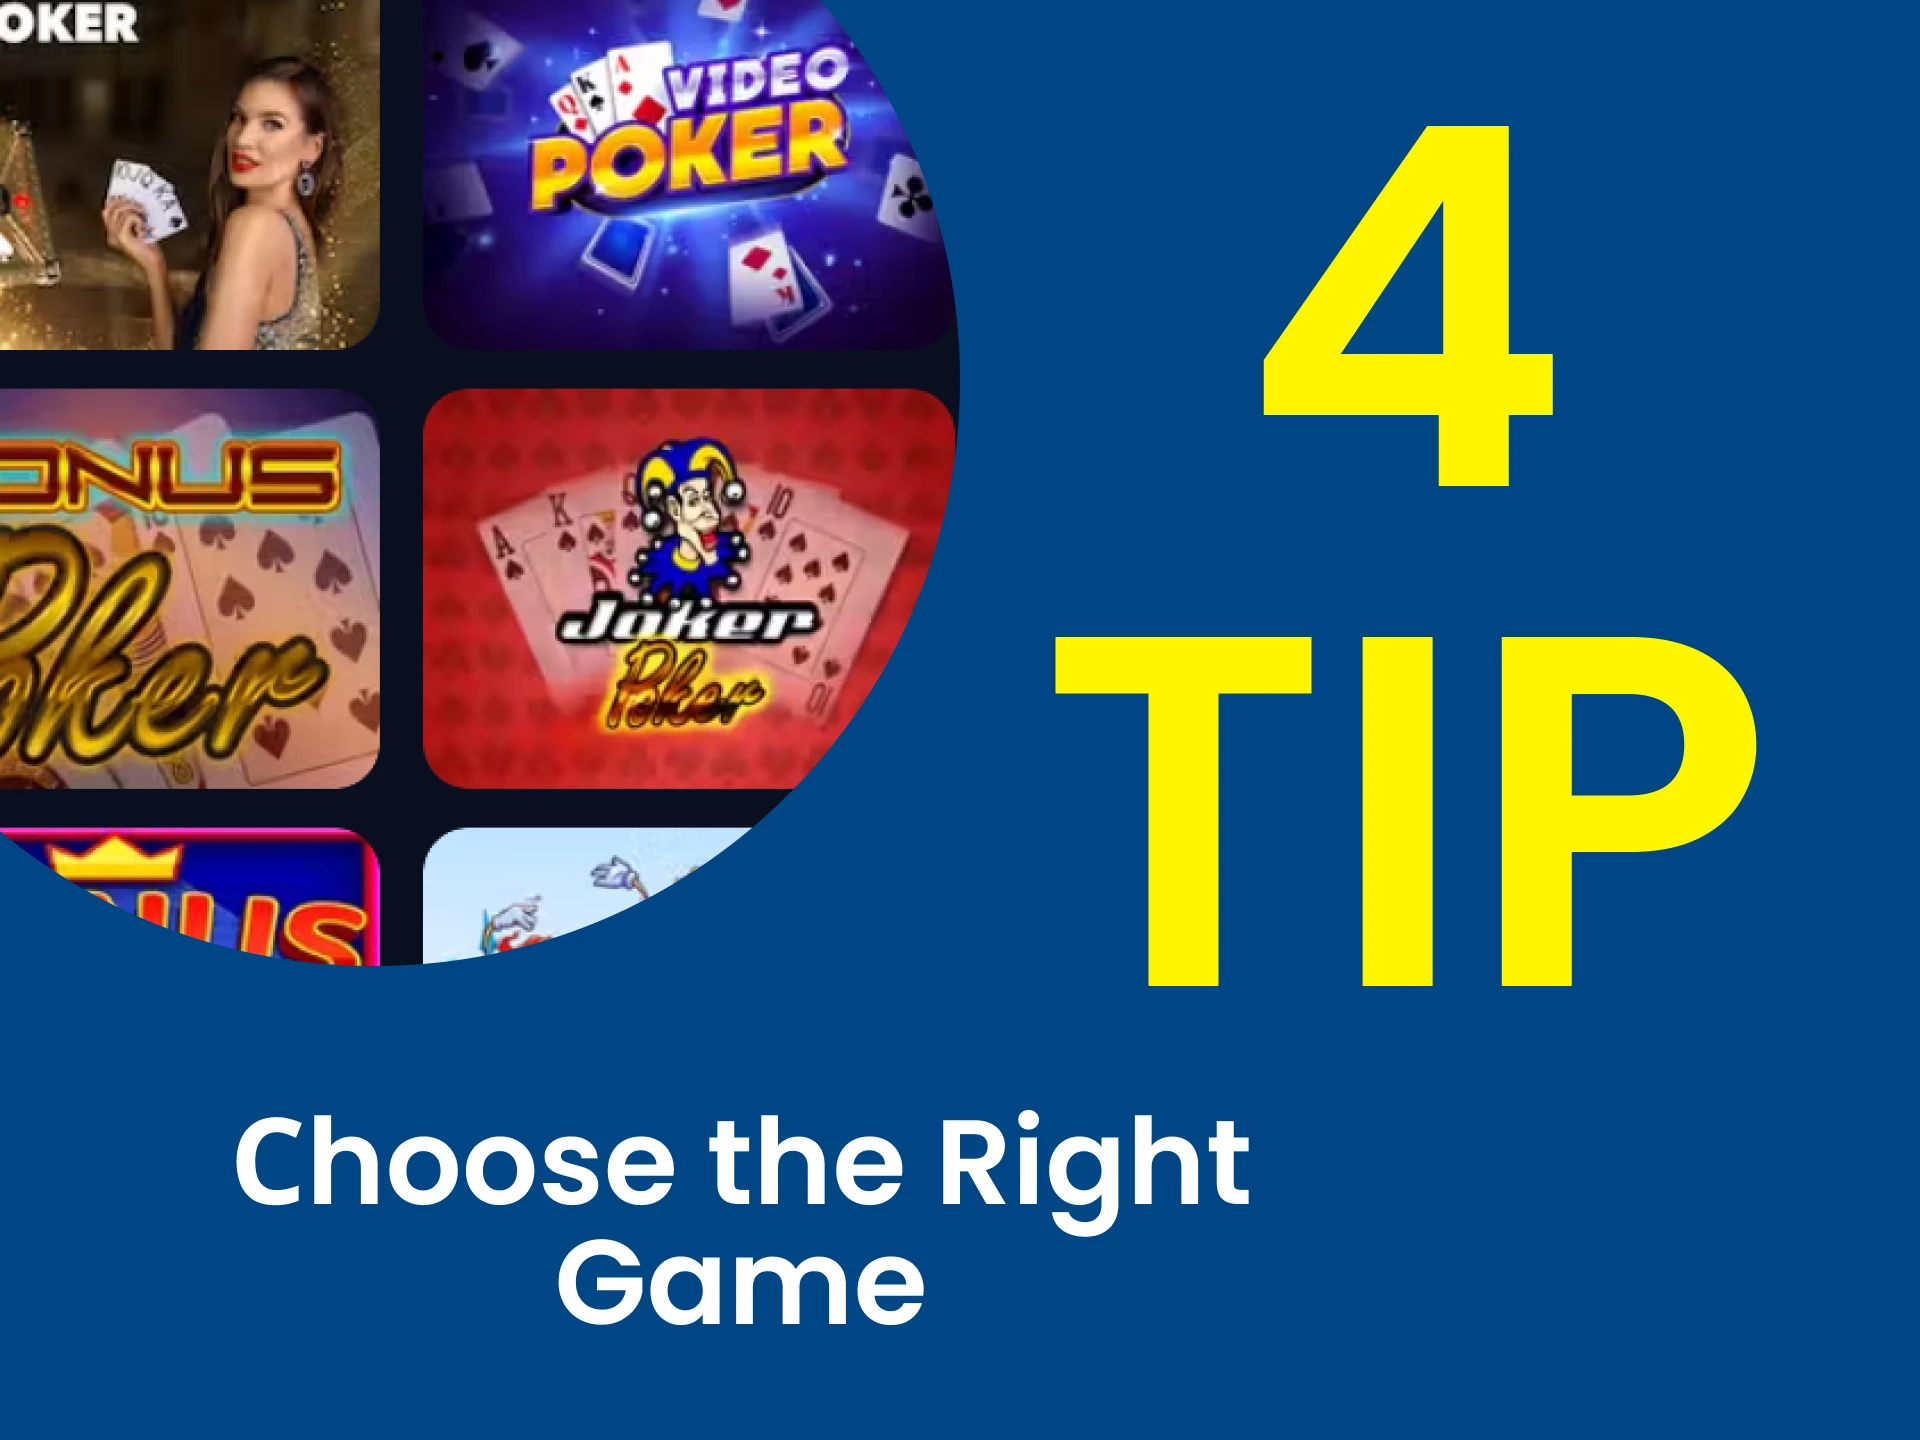 Choose the best version of the Video Poker game.